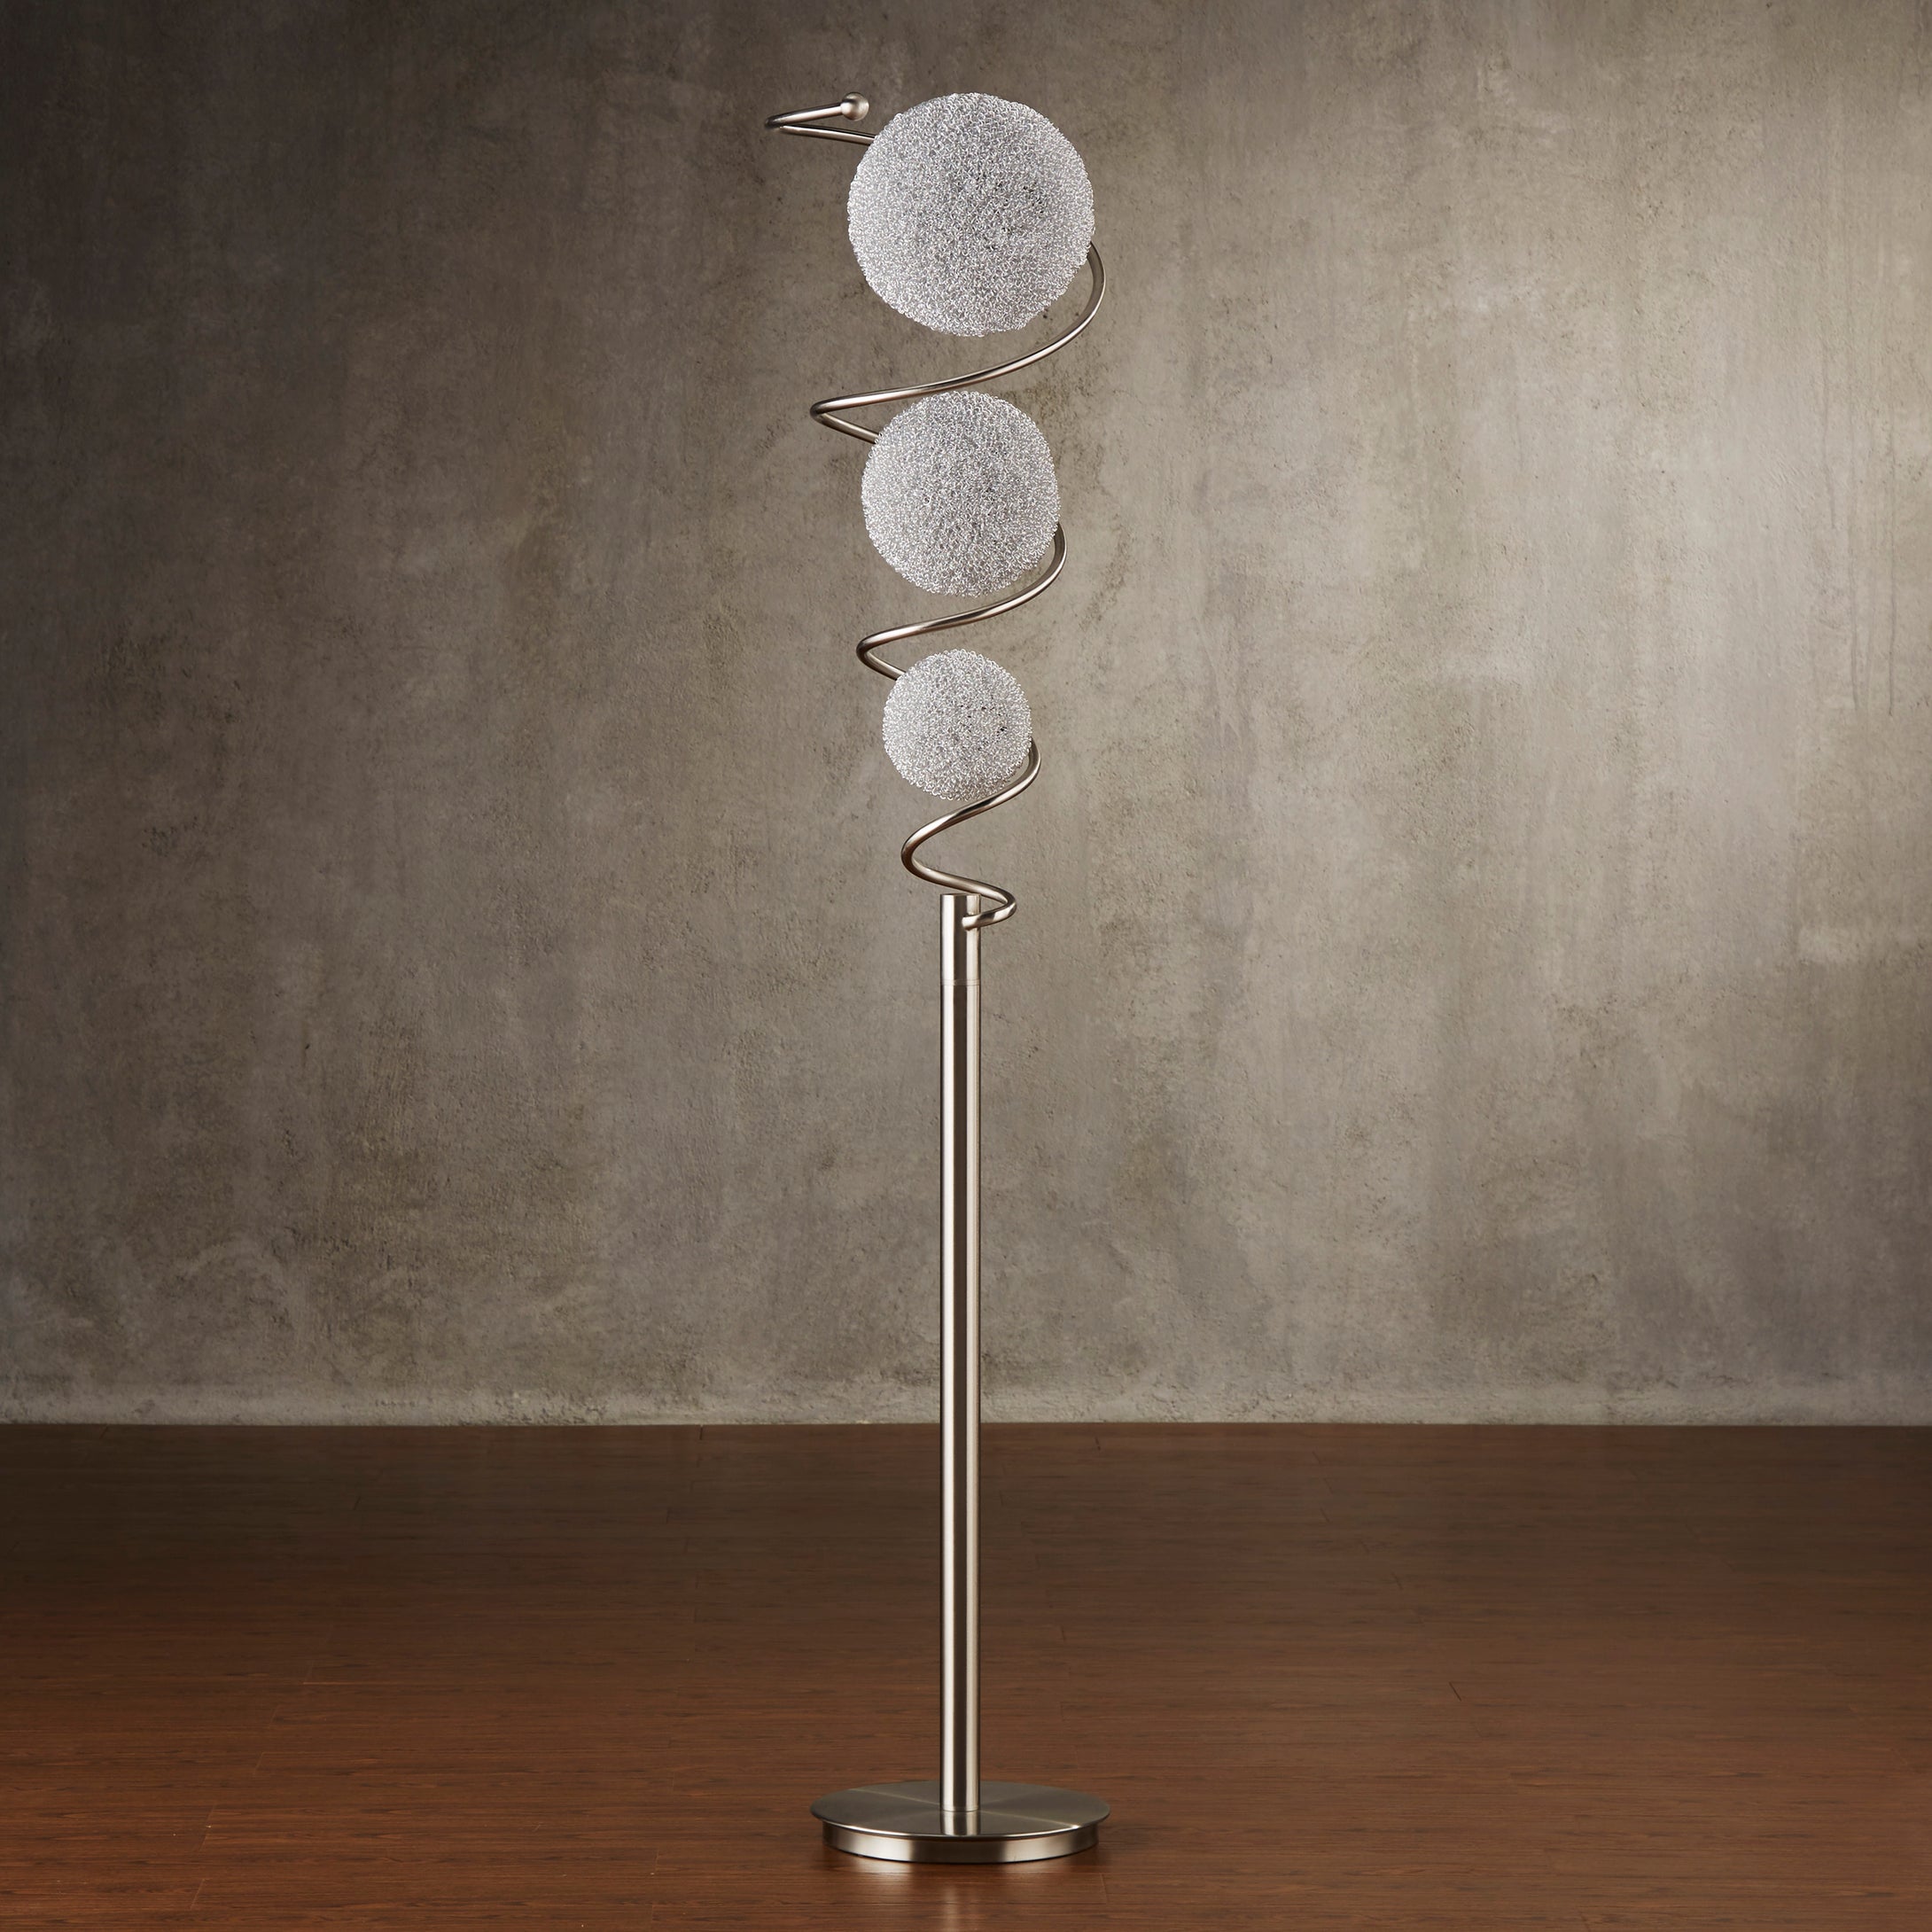 Luxurious 1pc Sparkling Decorative Designer Living Room or Bedroom Floor Lamp with 3 Wire-Wrapped Balls